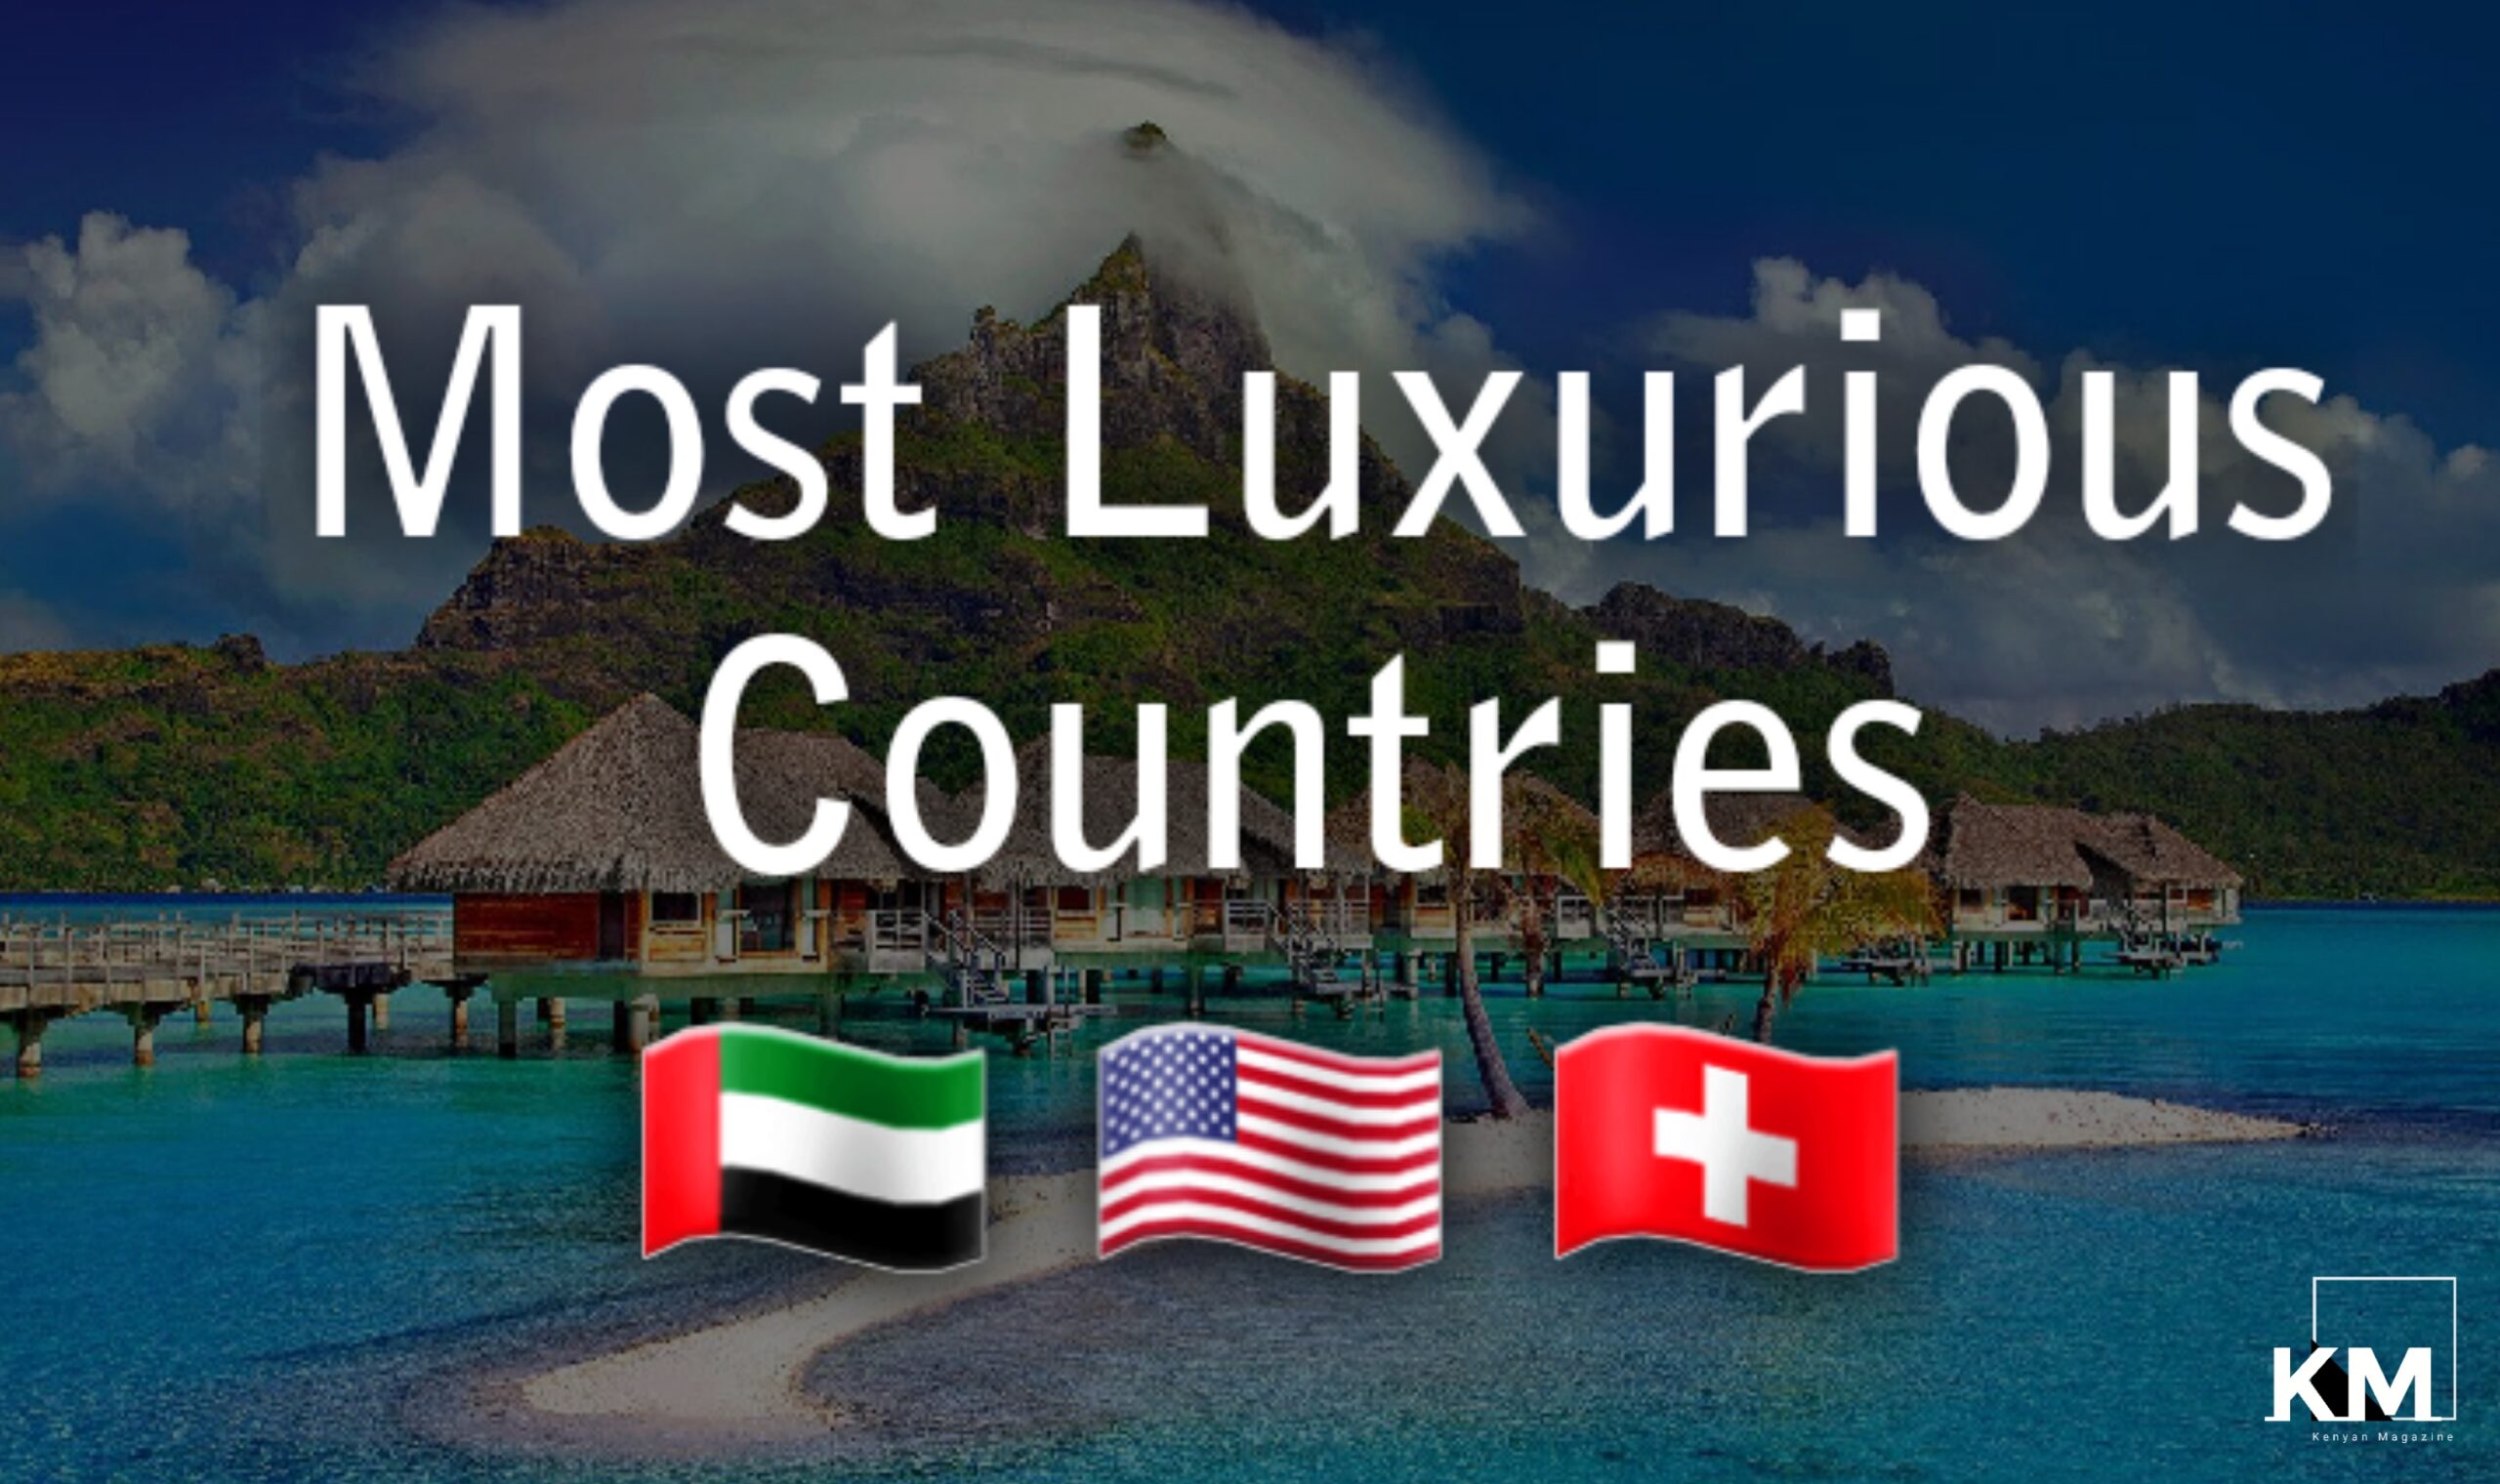 Luxury countries in the world